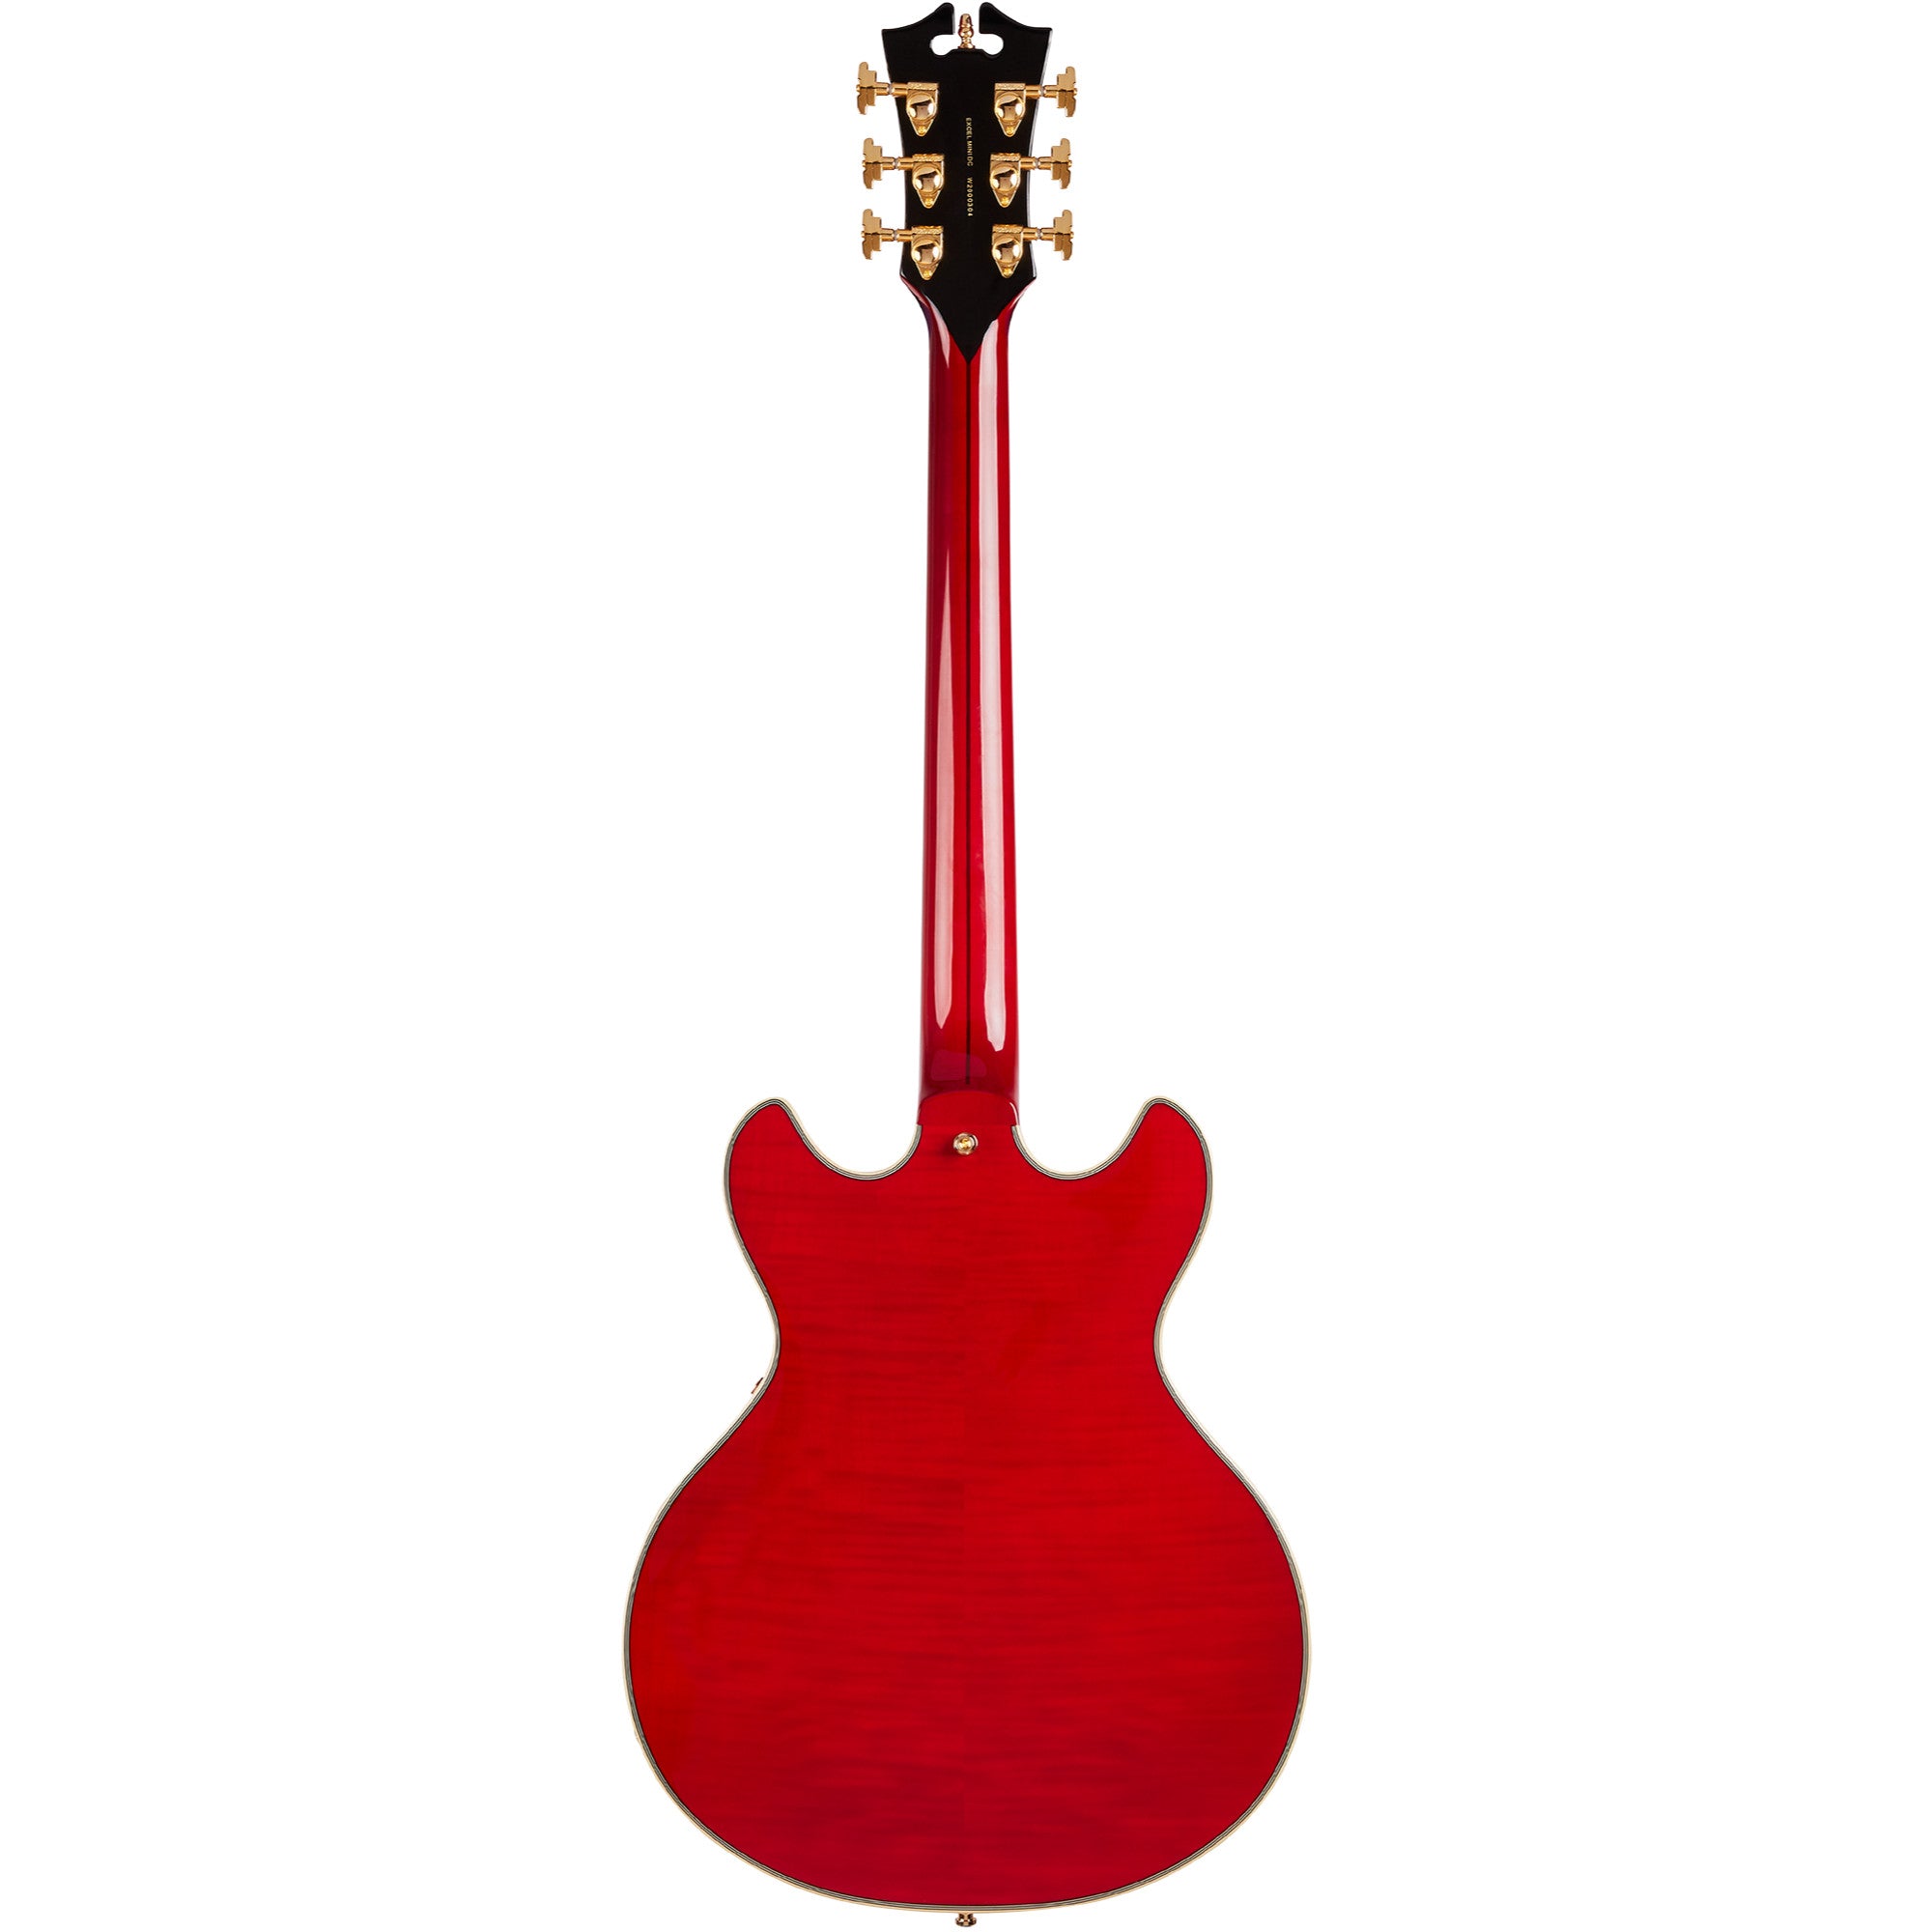 D'Angelico, D'Angelico Excel Mini Double Cutaway with Stop-Bar Tailpiece, Trans Cherry